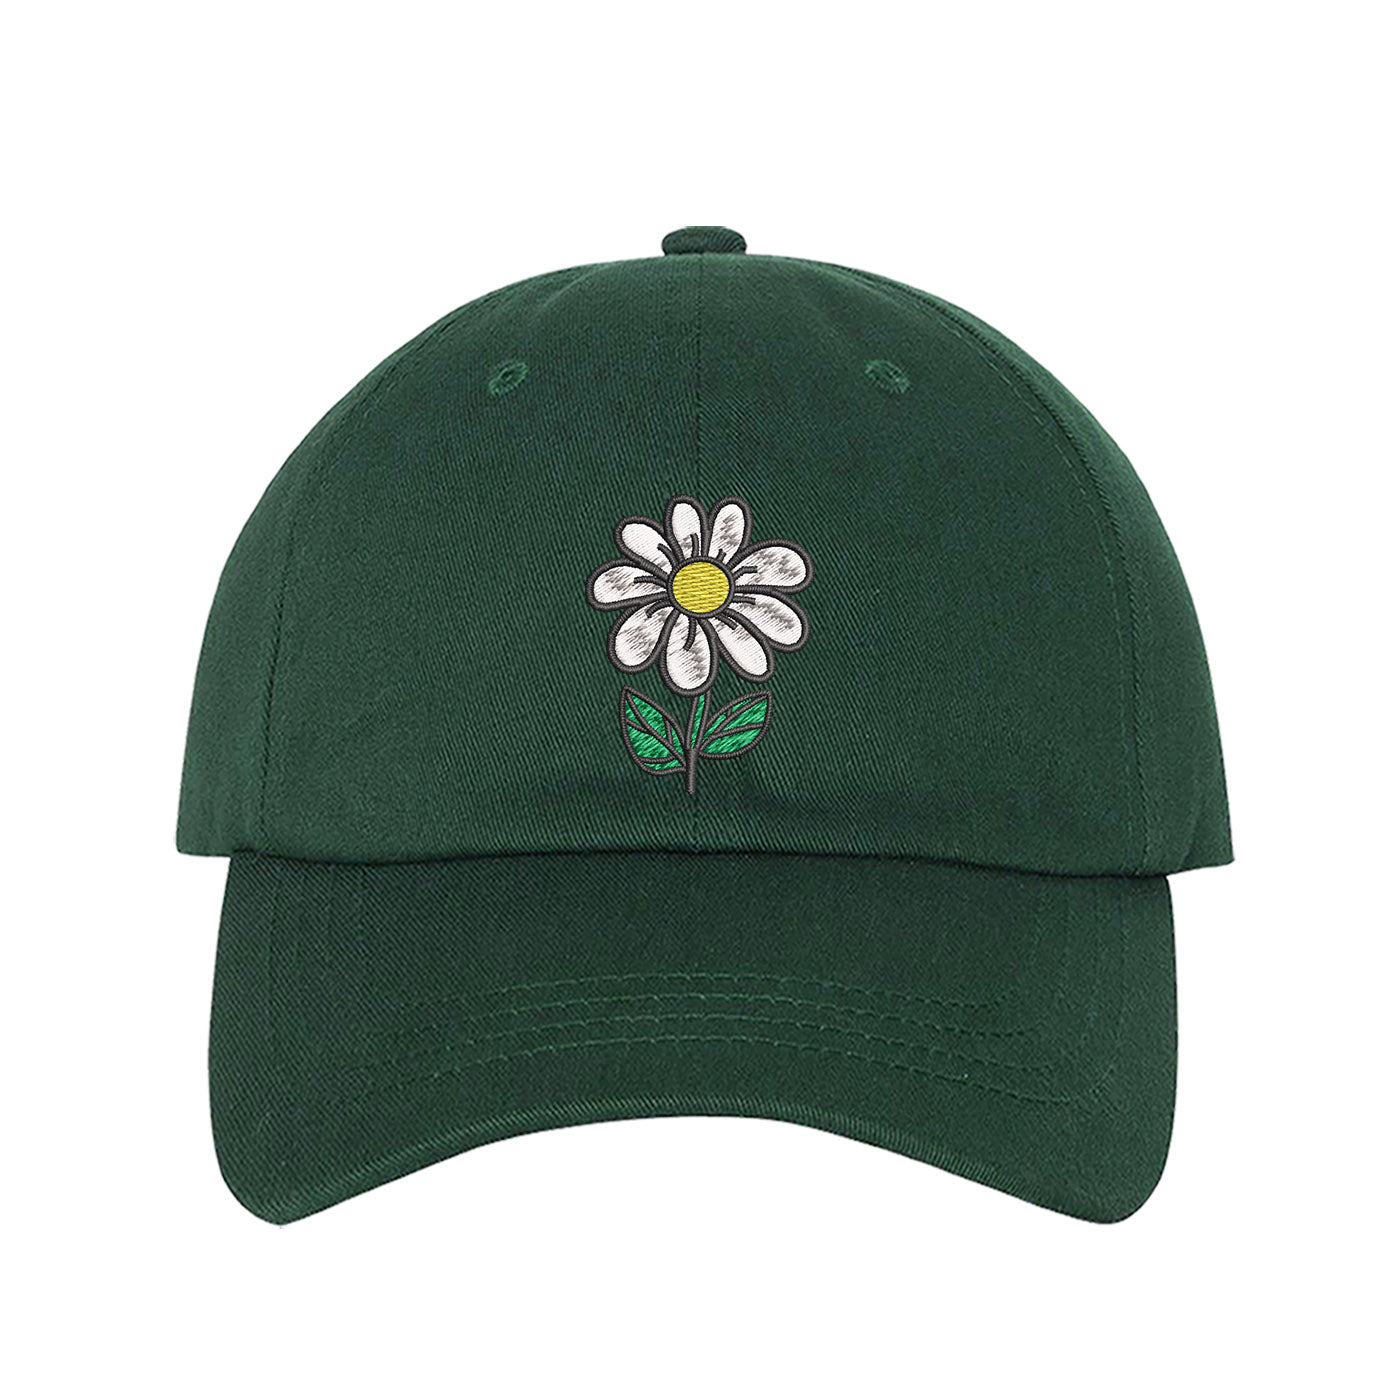 Forest Green Baseball Cap embroidered with a daisy flower with stem - DSY Lifestyle